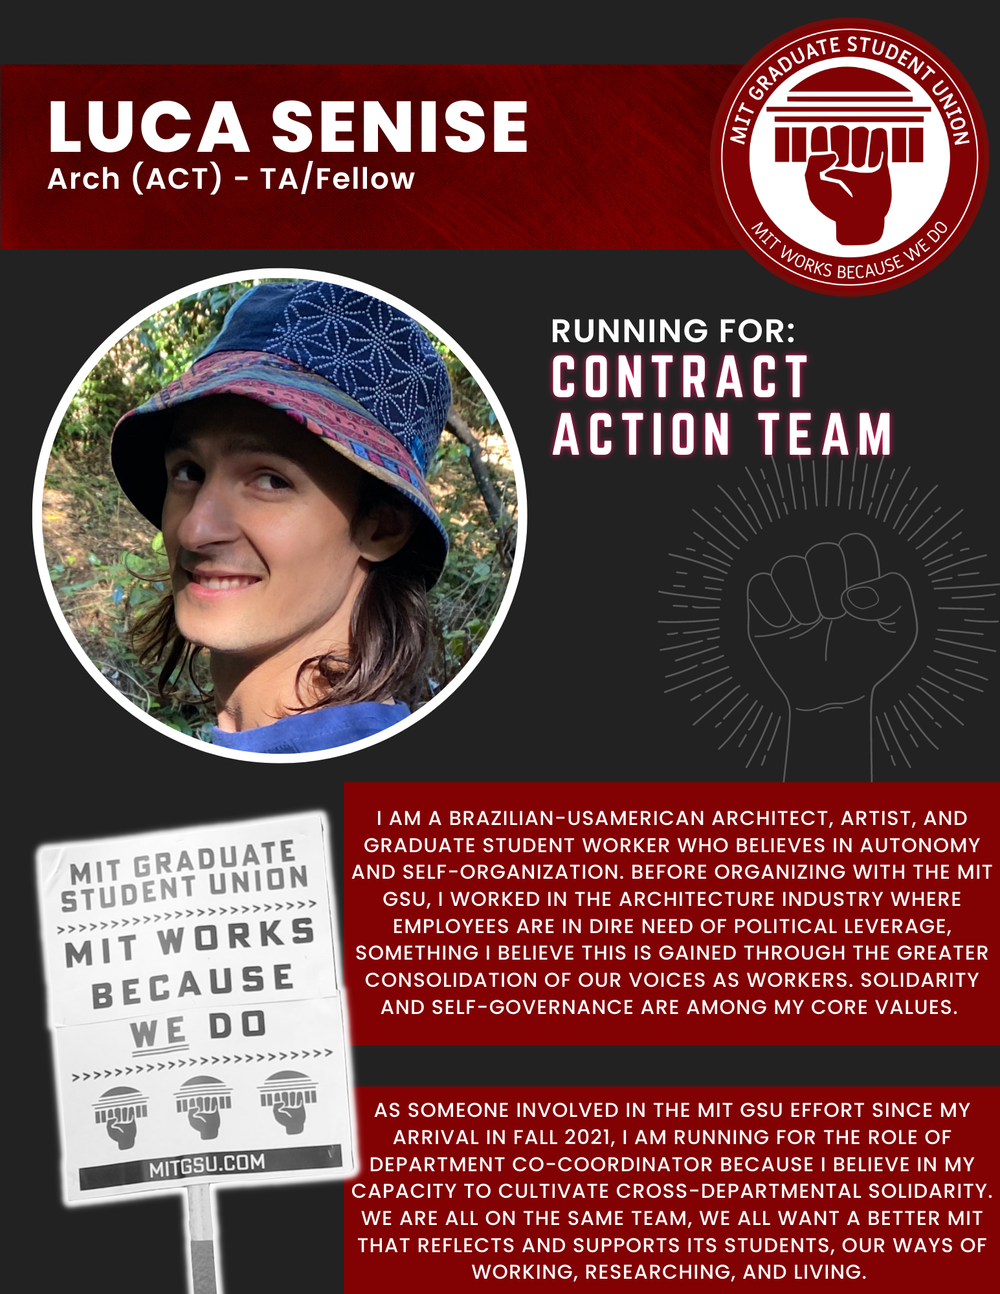  LUCA SENISE Arch (ACT) - TA/Fellow   RUNNING FOR: Contract Action Team  I AM A BRAZILIAN-USAMERICAN ARCHITECT, ARTIST, AND GRADUATE STUDENT WORKER WHO BELIEVES IN AUTONOMY AND SELF-ORGANIZATION. BEFORE ORGANIZING WITH THE MIT GSU, I WORKED IN THE AR